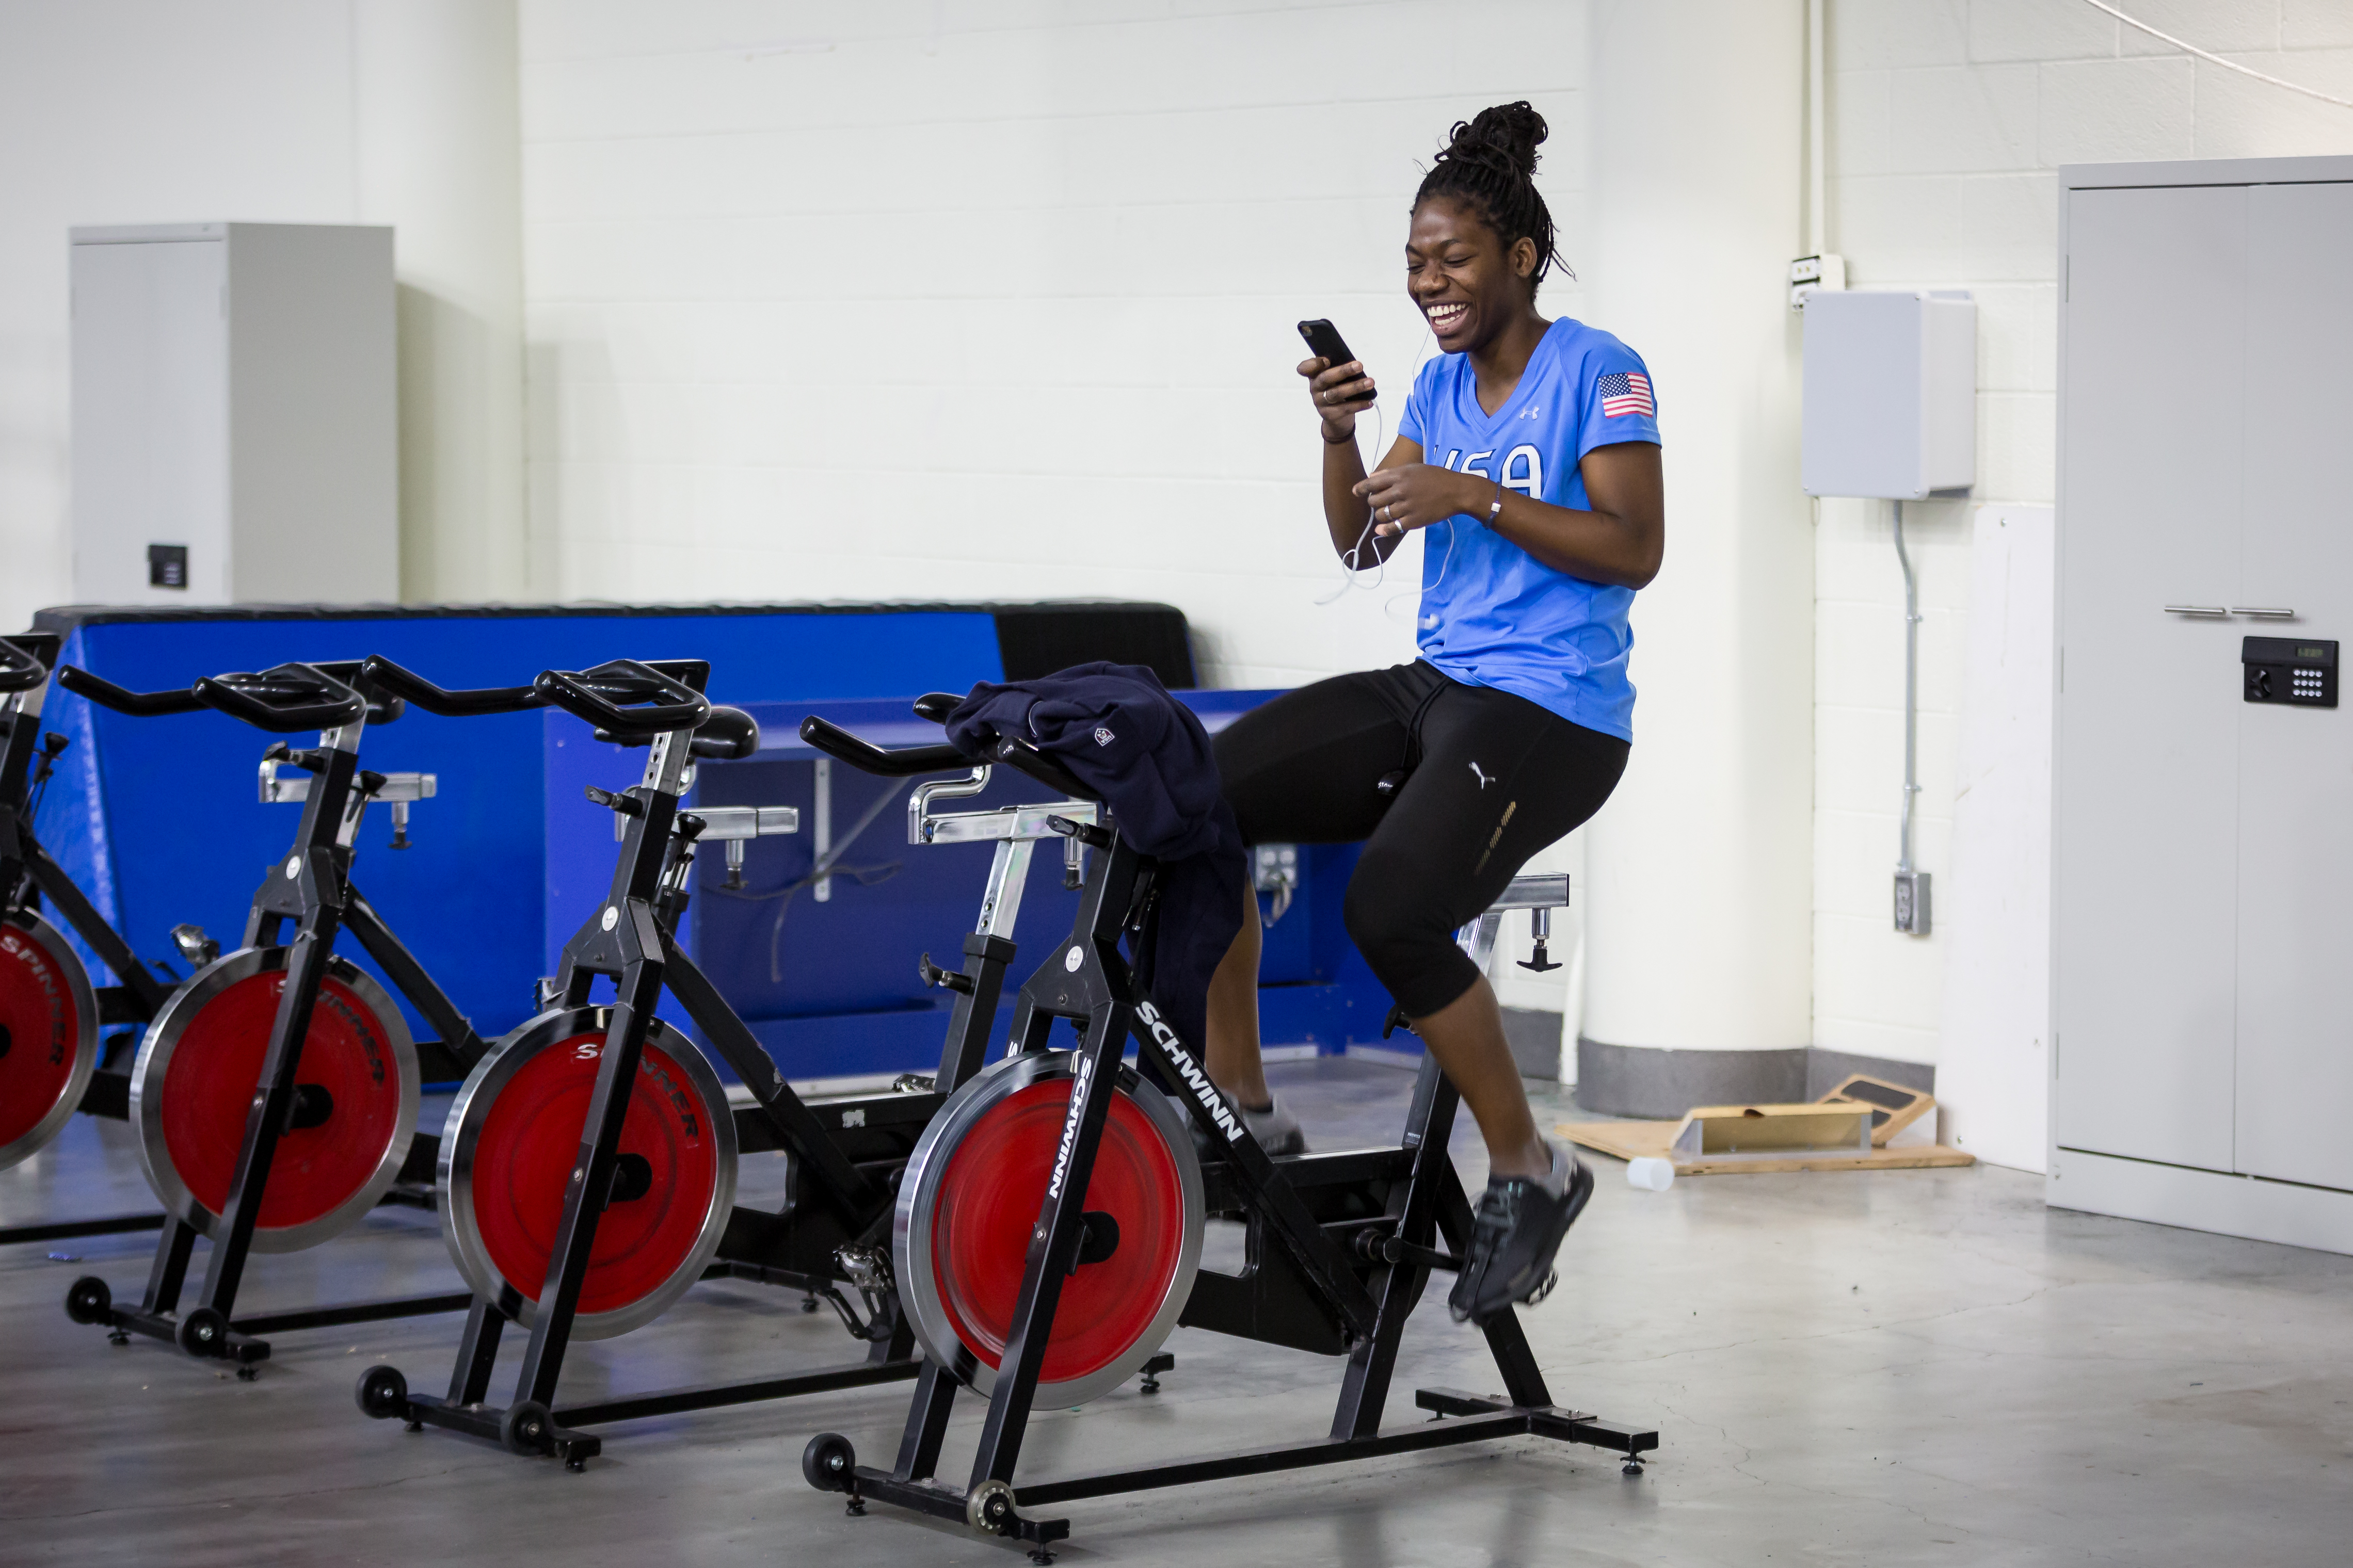 Maame Biney training at the Olympic Oval in Kearns